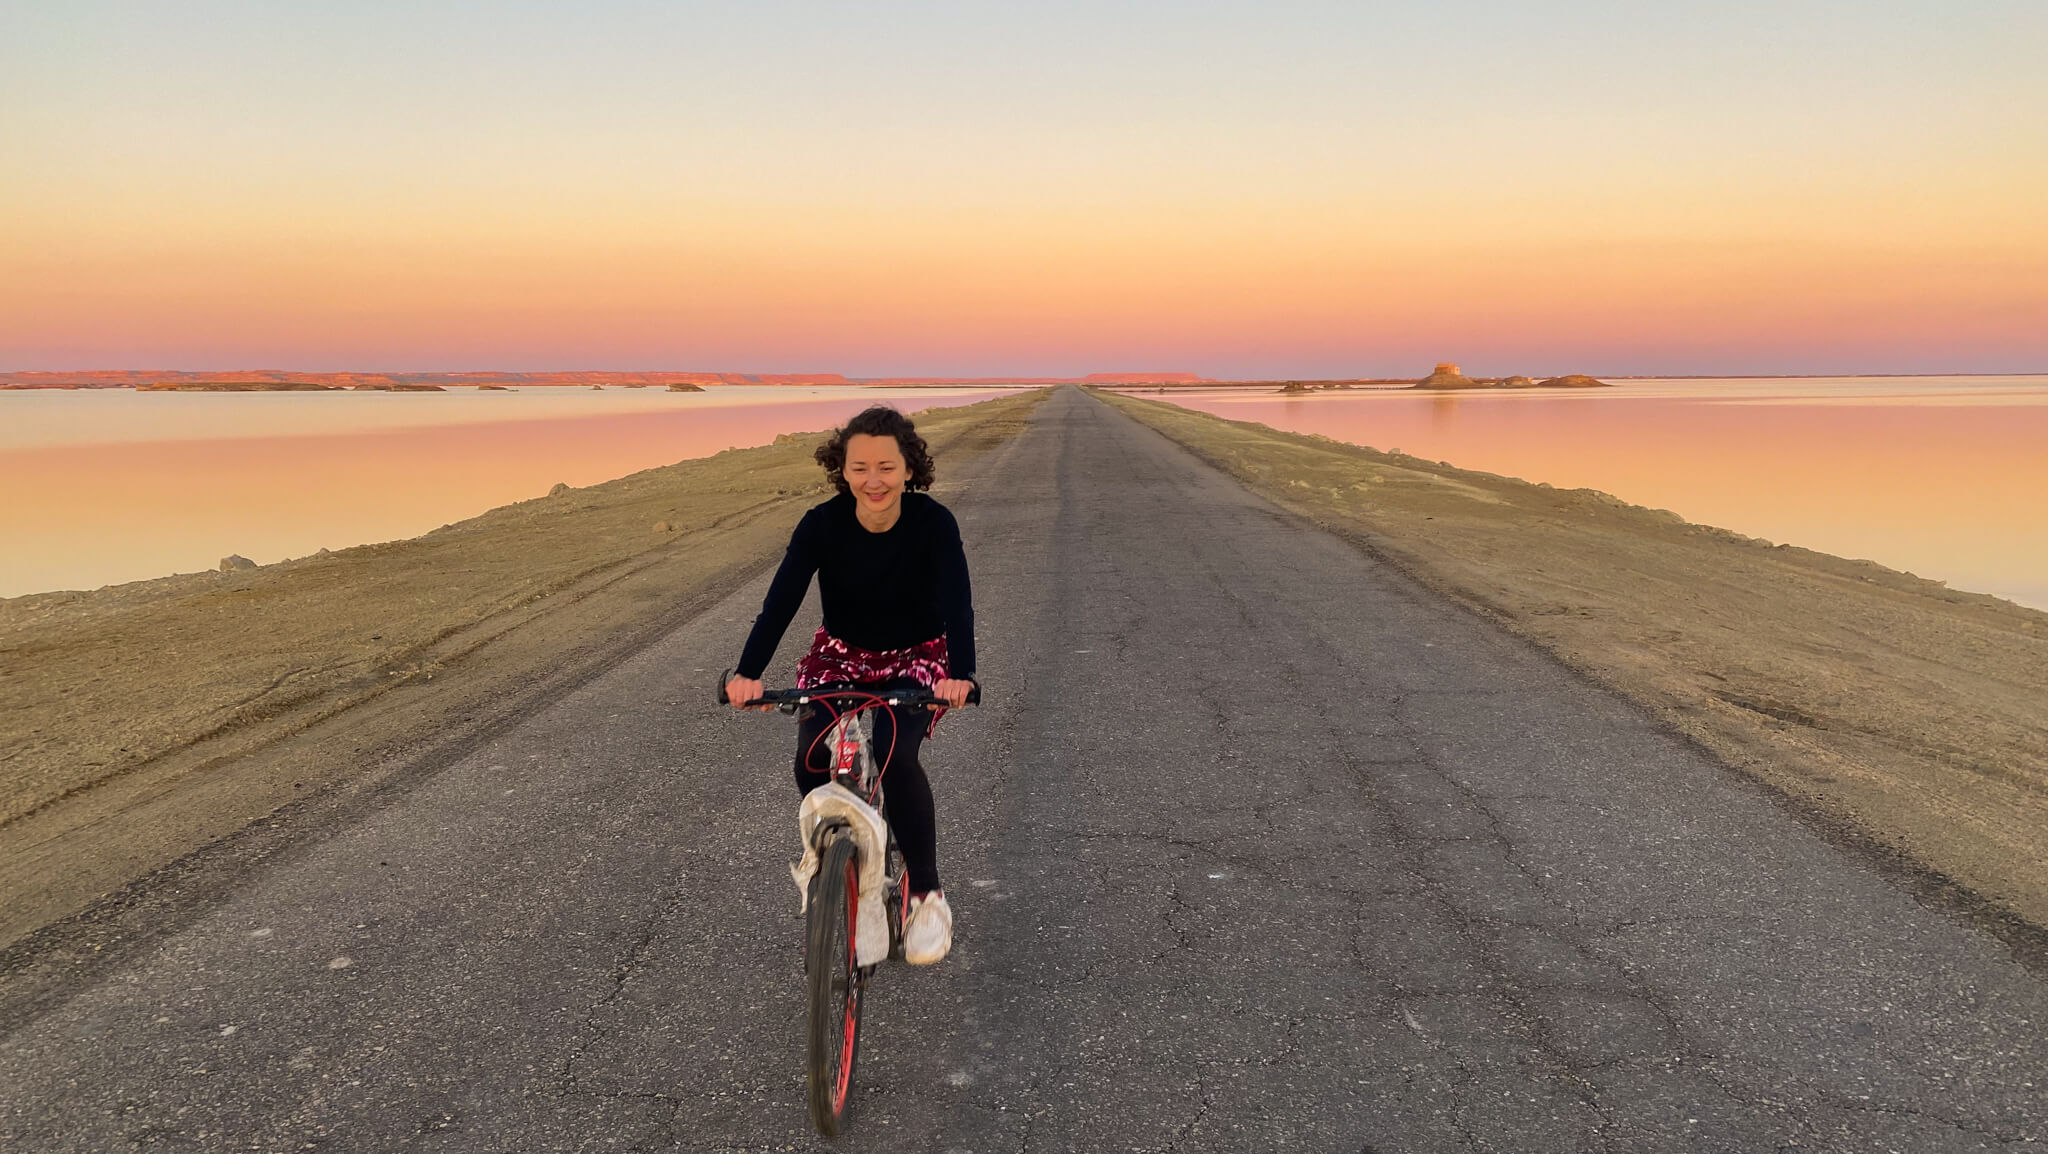 Anna cycling with the pink sky and lake in the background.